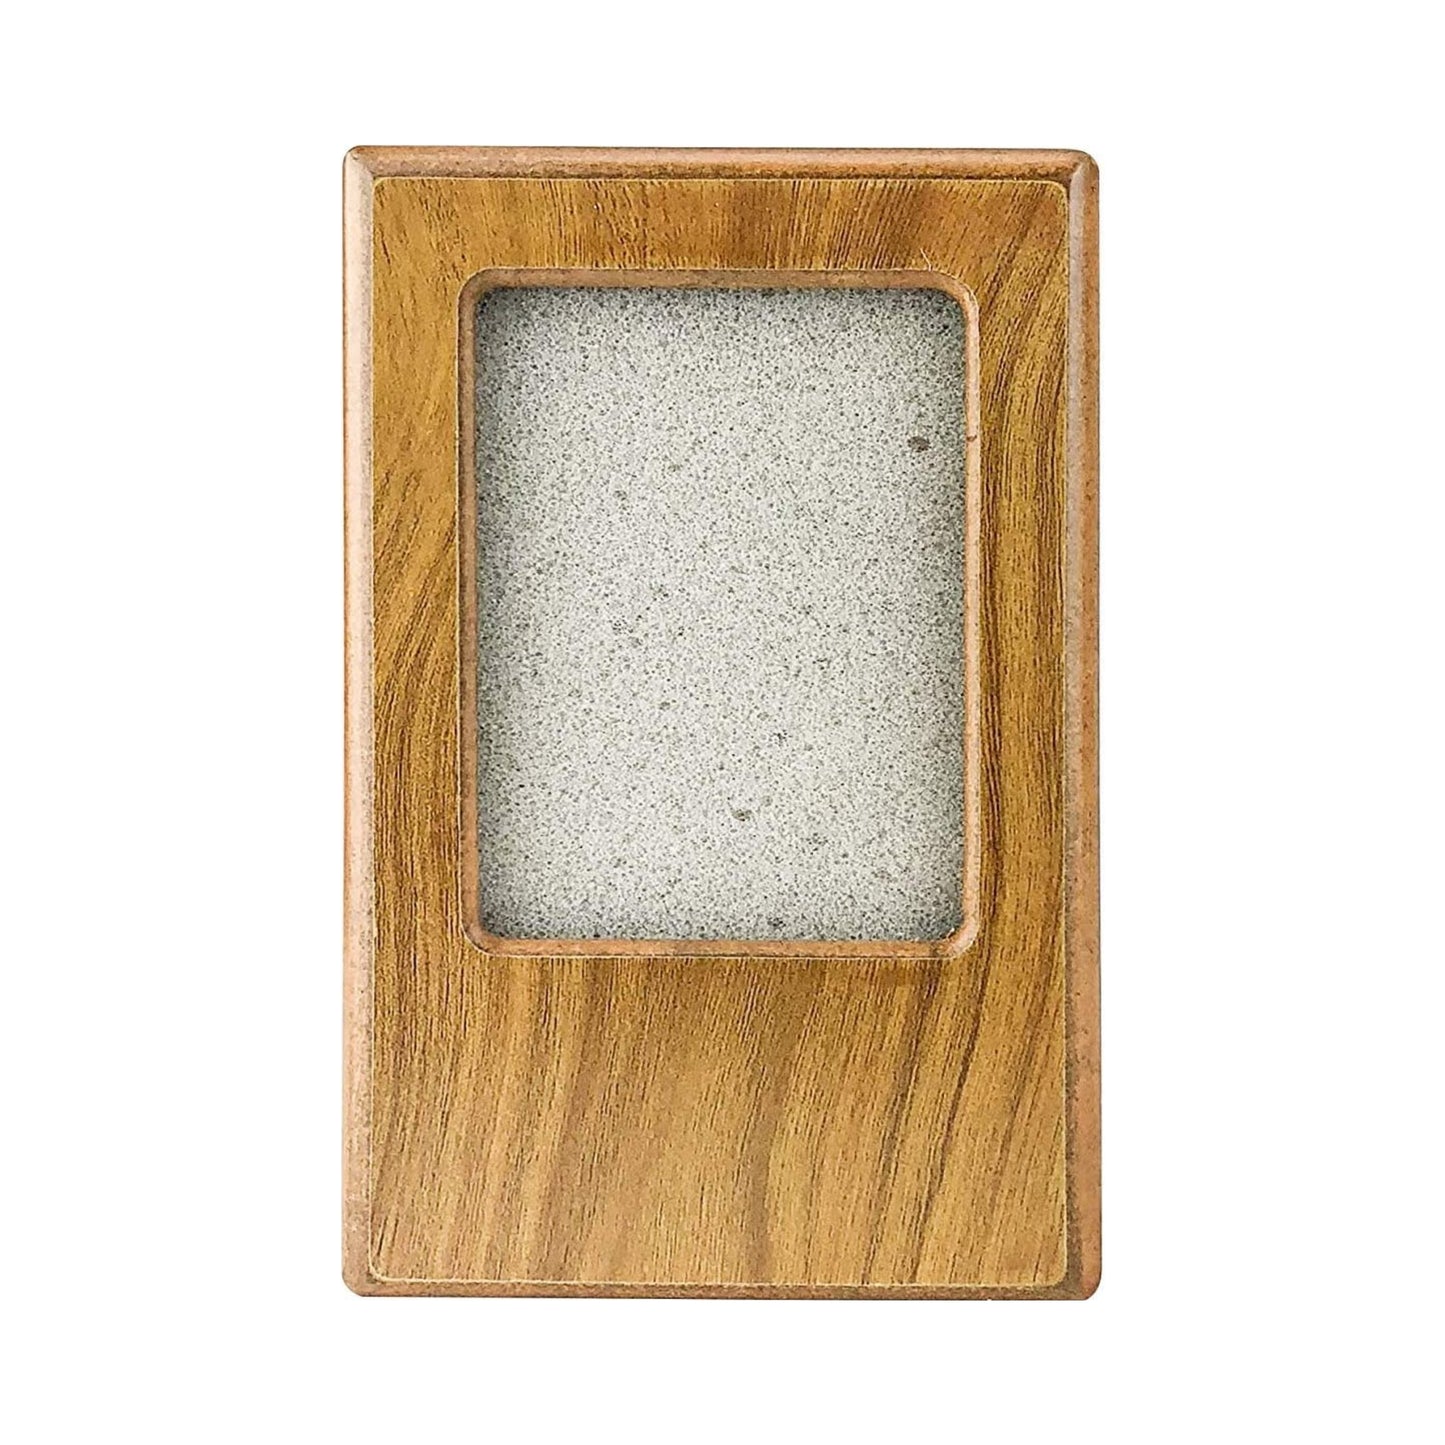 Midlee Oak Picture Frame Pet Urn 6.5" x 4.75" x 5", Up to 70lb Pet